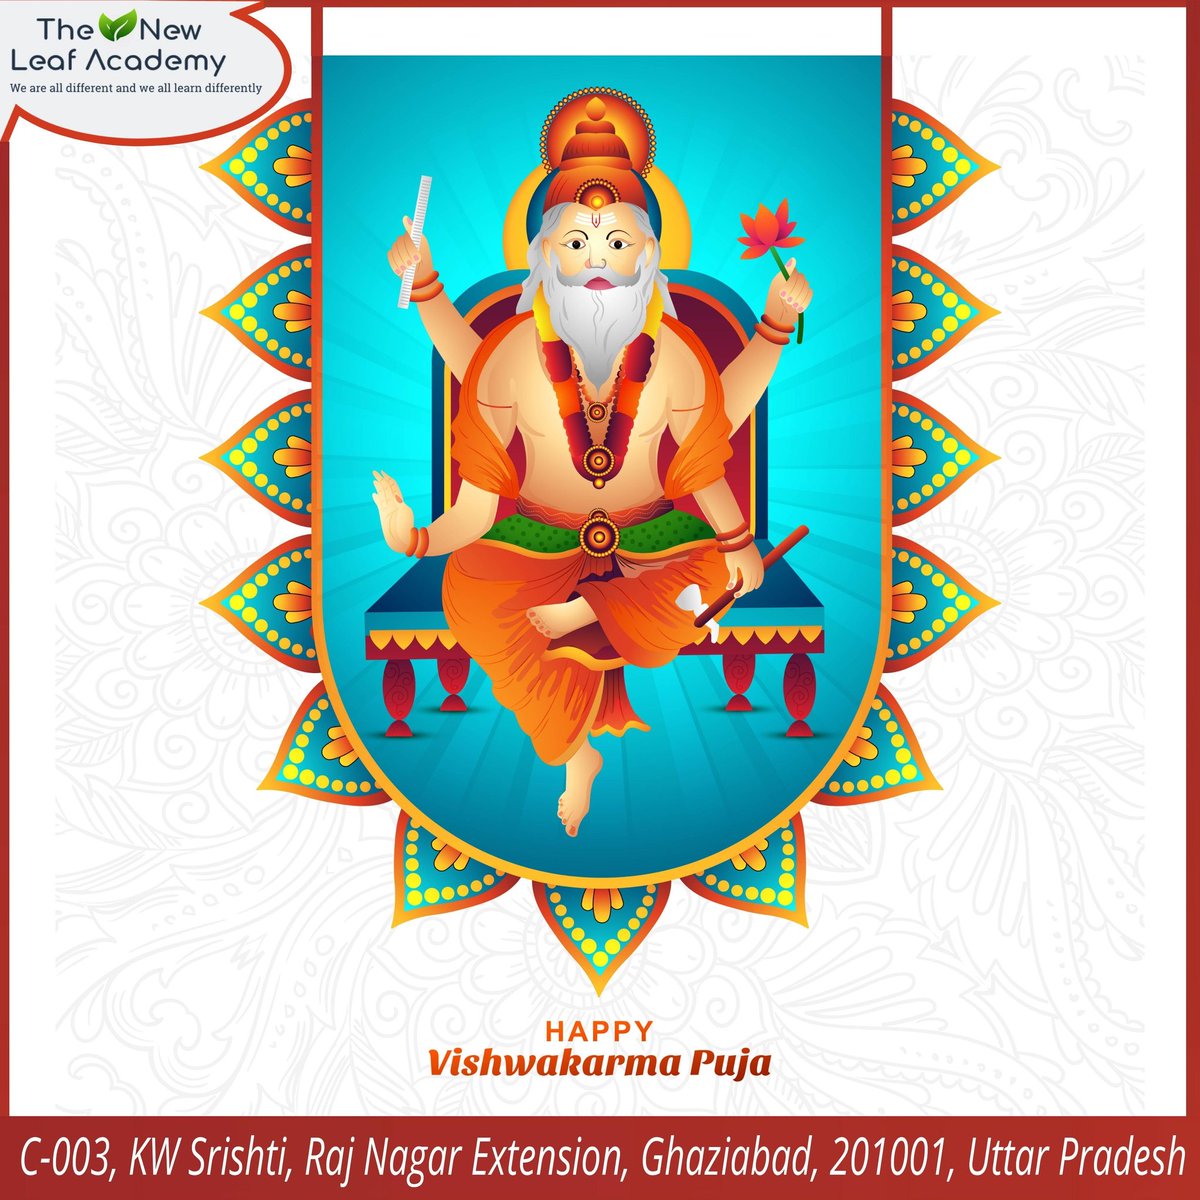 '🙏 Celebrating Vishwakarma Puja, a day to honor the divine architect! 🏗️ May Lord Vishwakarma's blessings guide us in our creative endeavors and craftsmanship. 🌟 #VishwakarmaPuja #DivineArchitect #Blessings